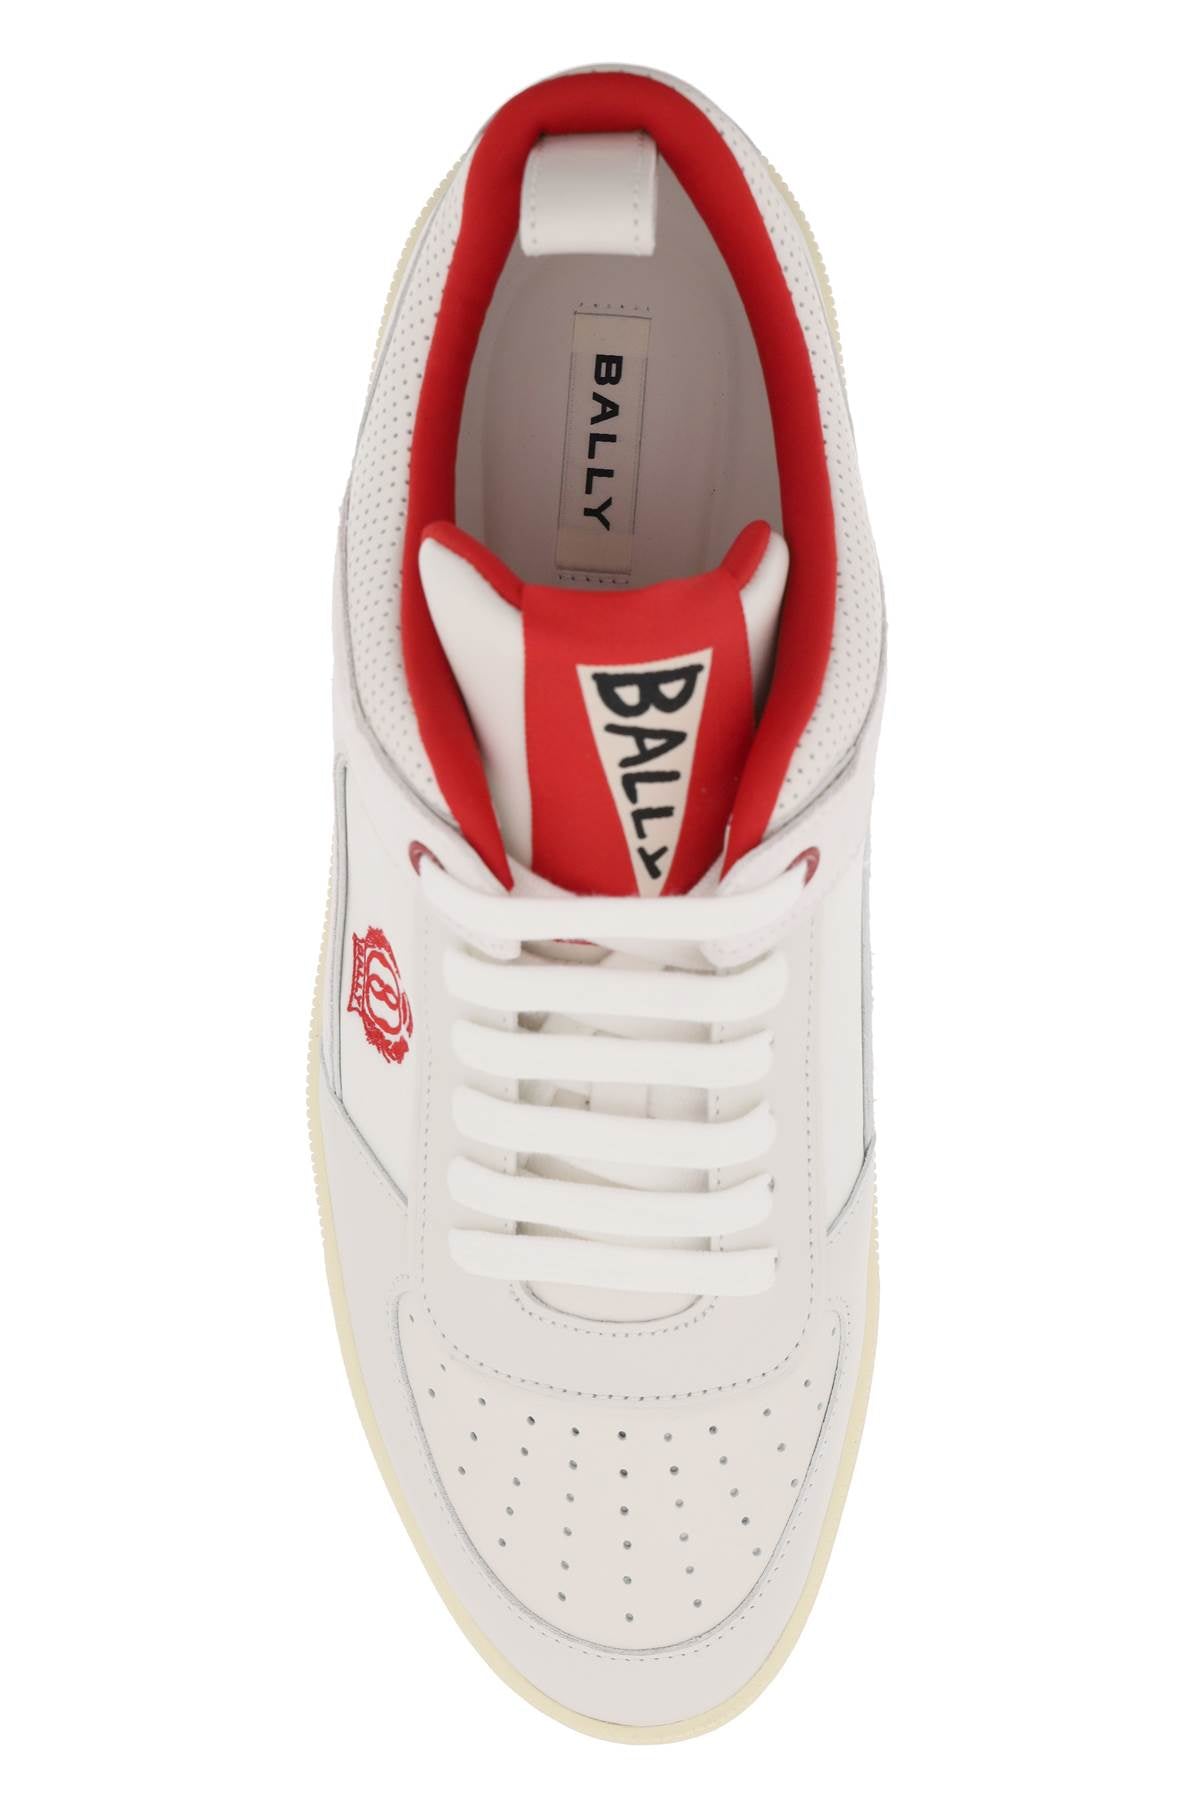 Bally leather riweira sneakers-1